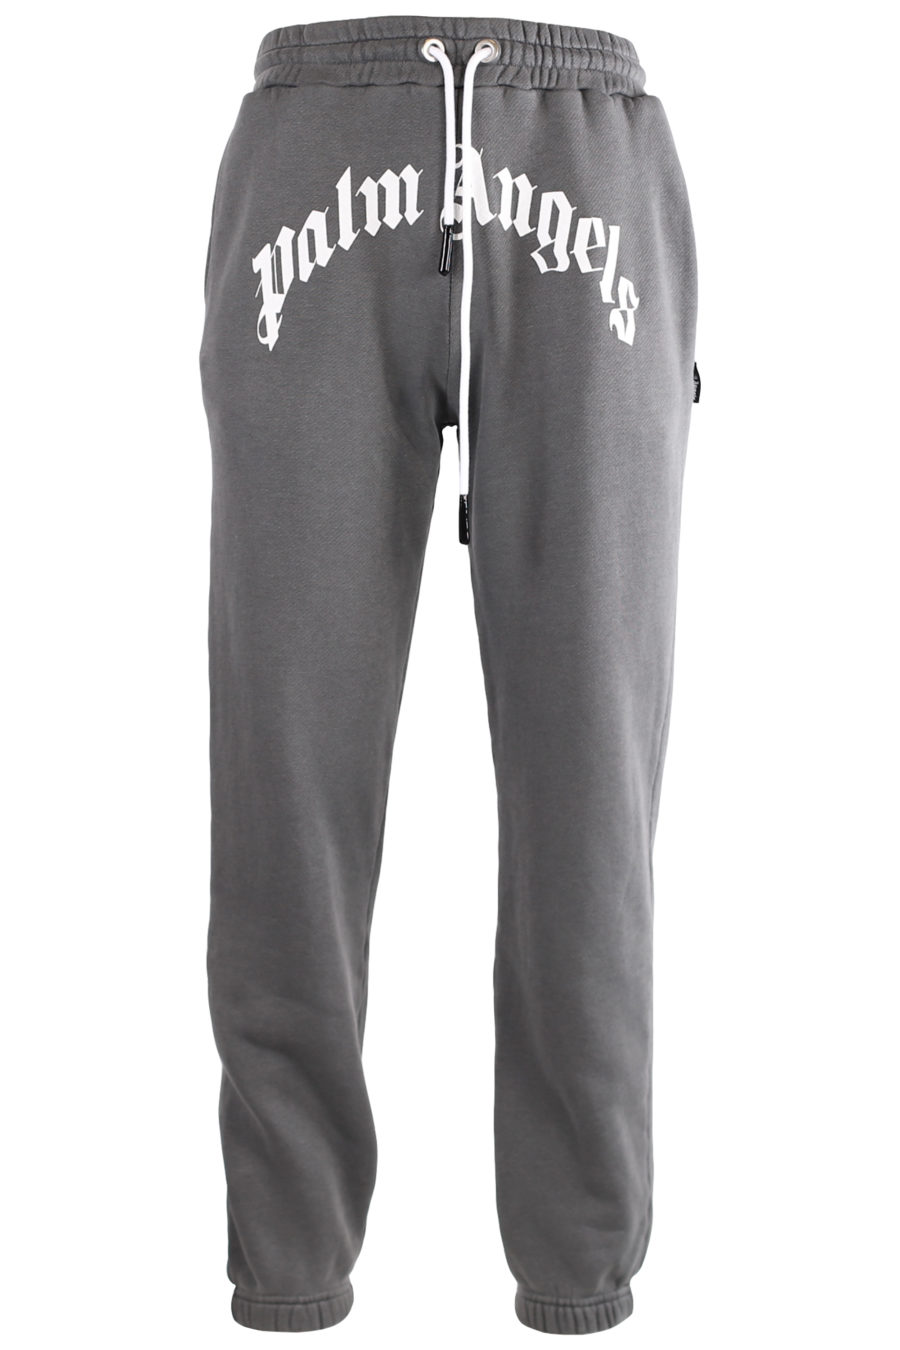 Tracksuit bottoms grey with white logo - IMG 7270